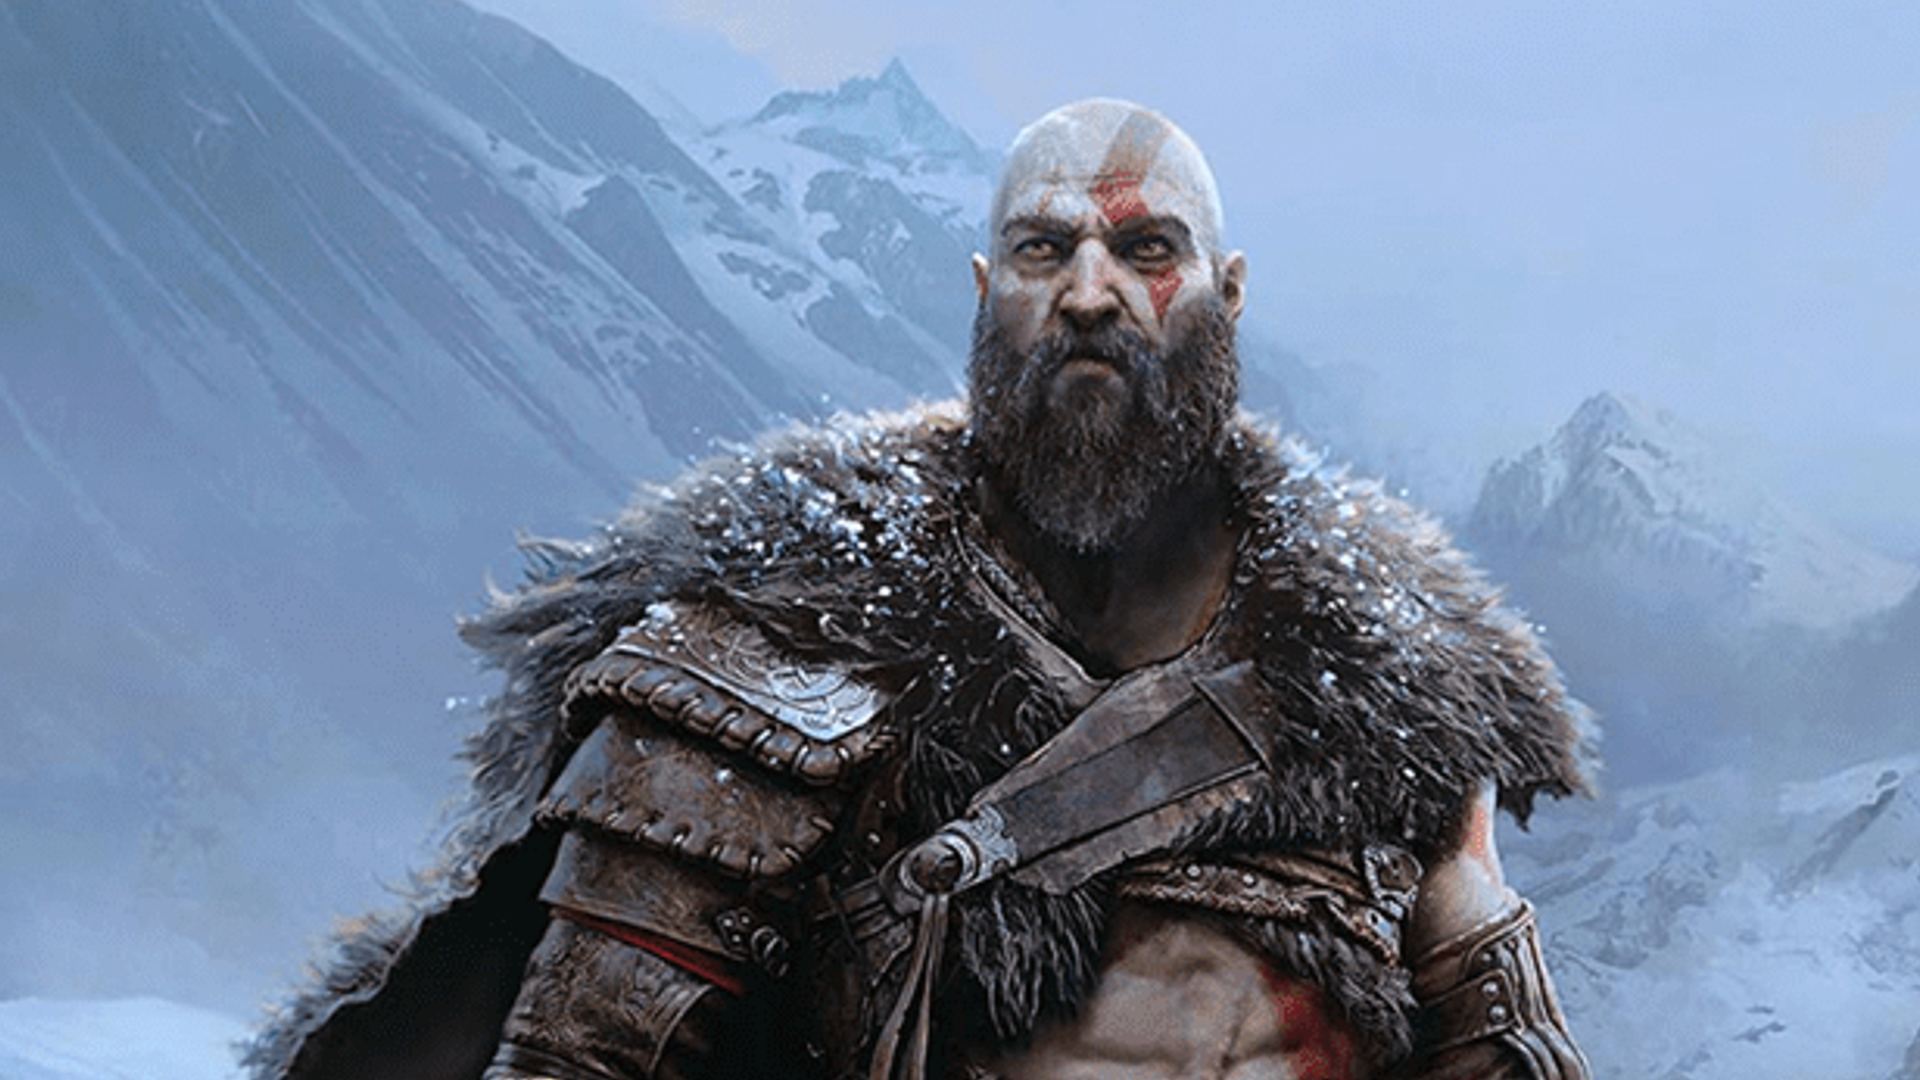 How Tall is Kratos in God of War Ragnarok? Answered